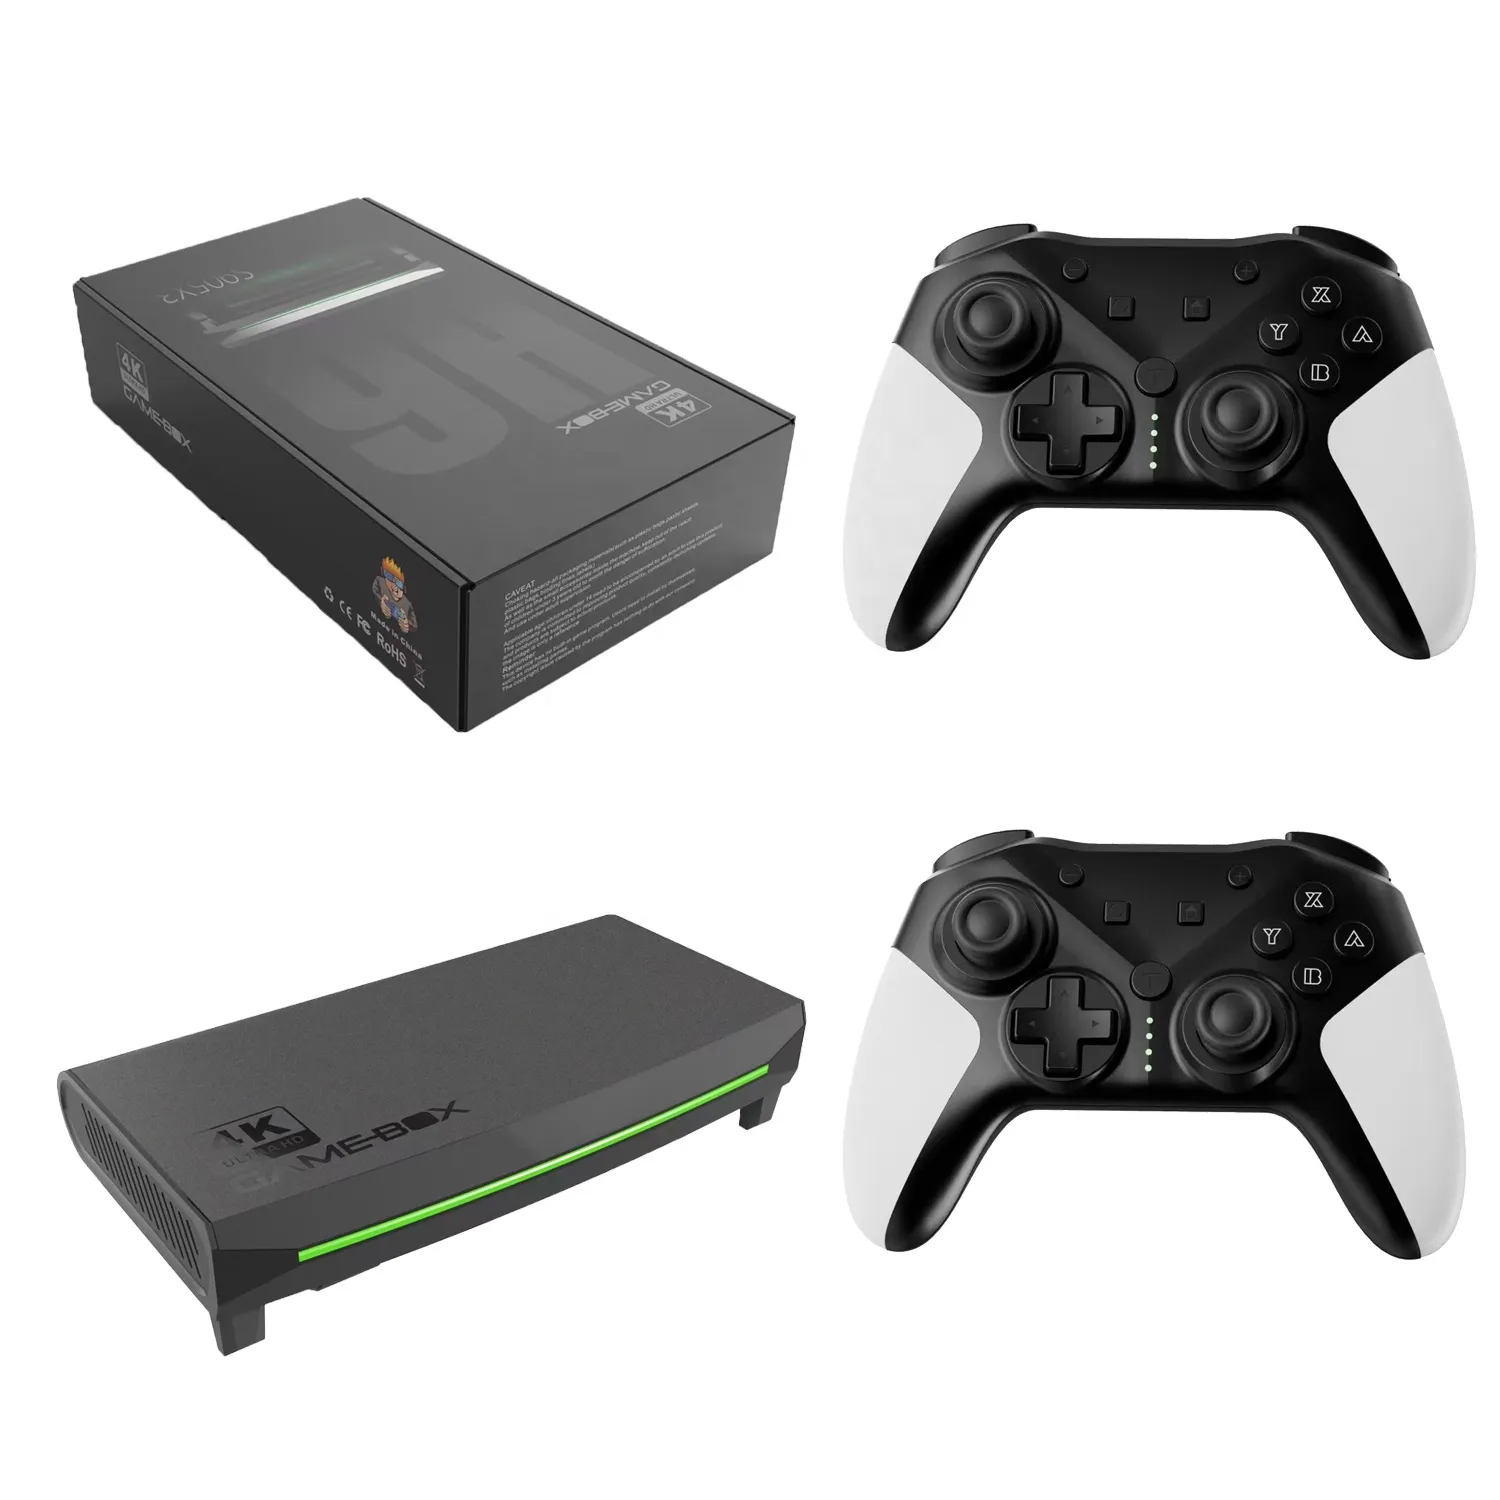 H6 Super Game Box 4K Hd Output Tv Video Game Console Draadloze Controles 10000 + Games Tv Box Retro gaming Consoles Voor Psp